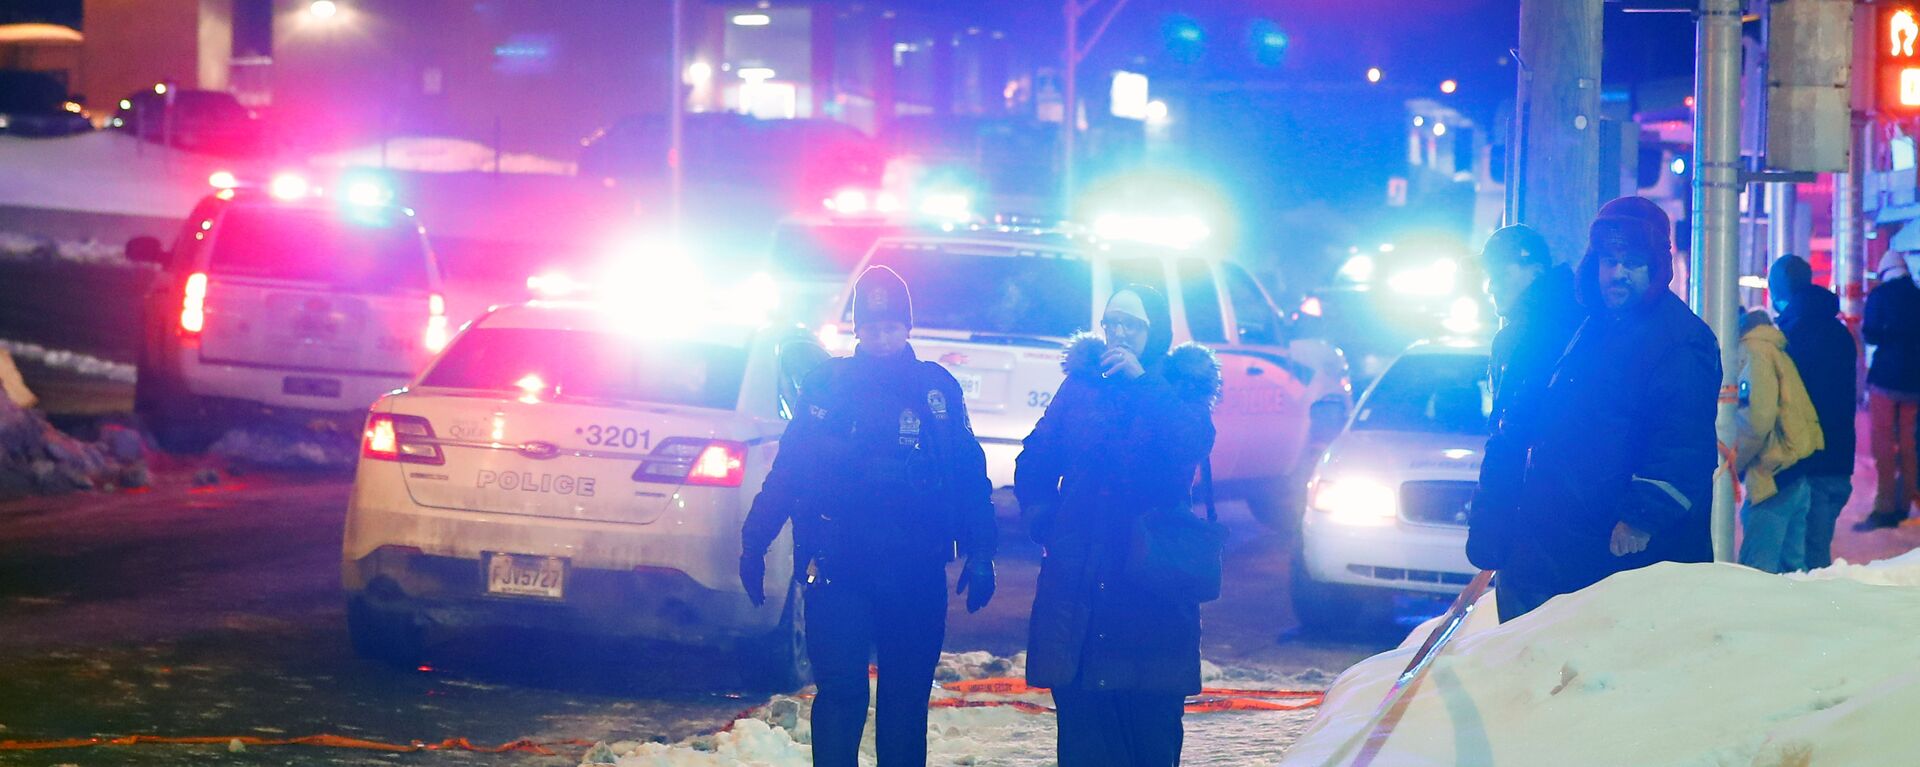 Police officers are seen near a mosque after a shooting in Quebec City, January 29, 2017 - Sputnik International, 1920, 10.06.2018